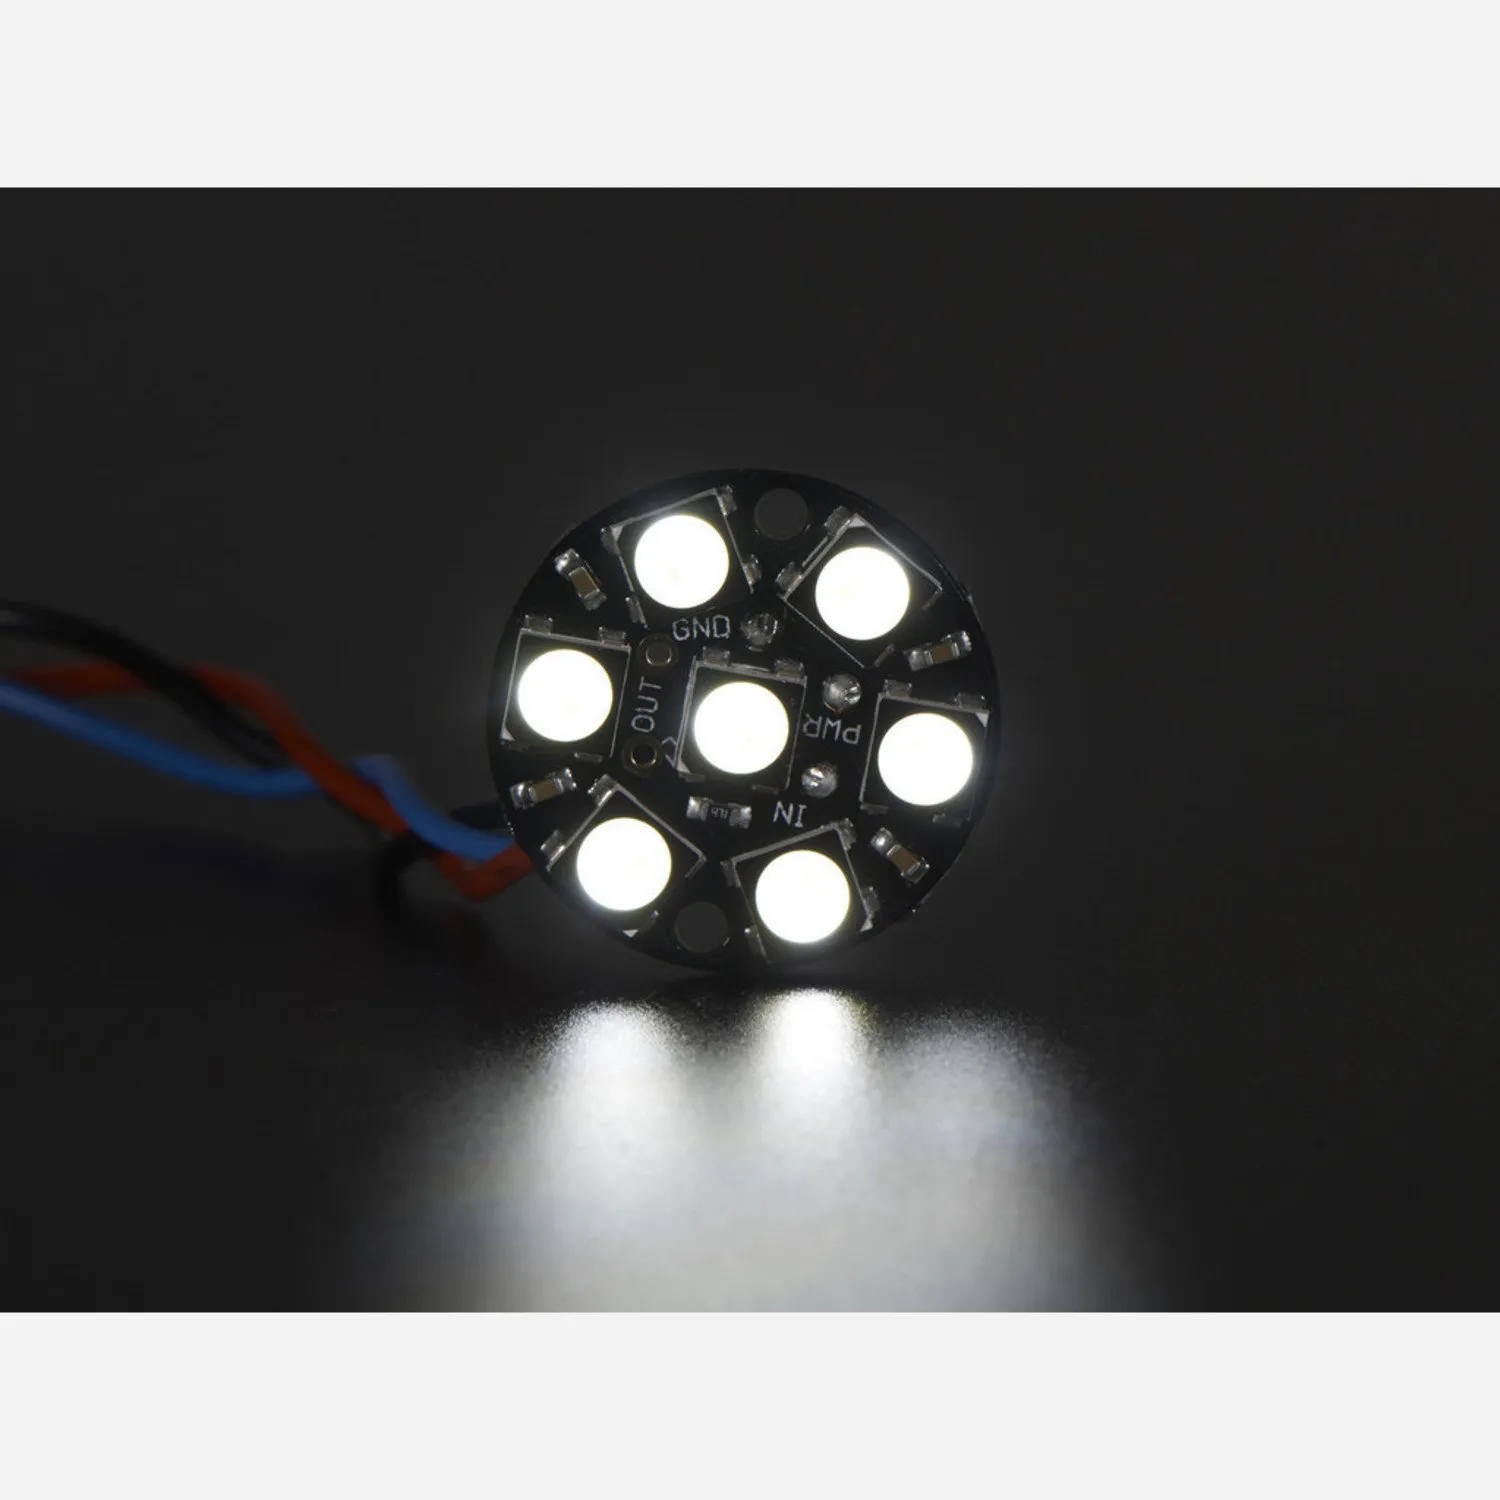 Photo of NeoPixel Jewel - 7 x 5050 RGBW LED w/ Integrated Drivers - Cool White - ~6000K